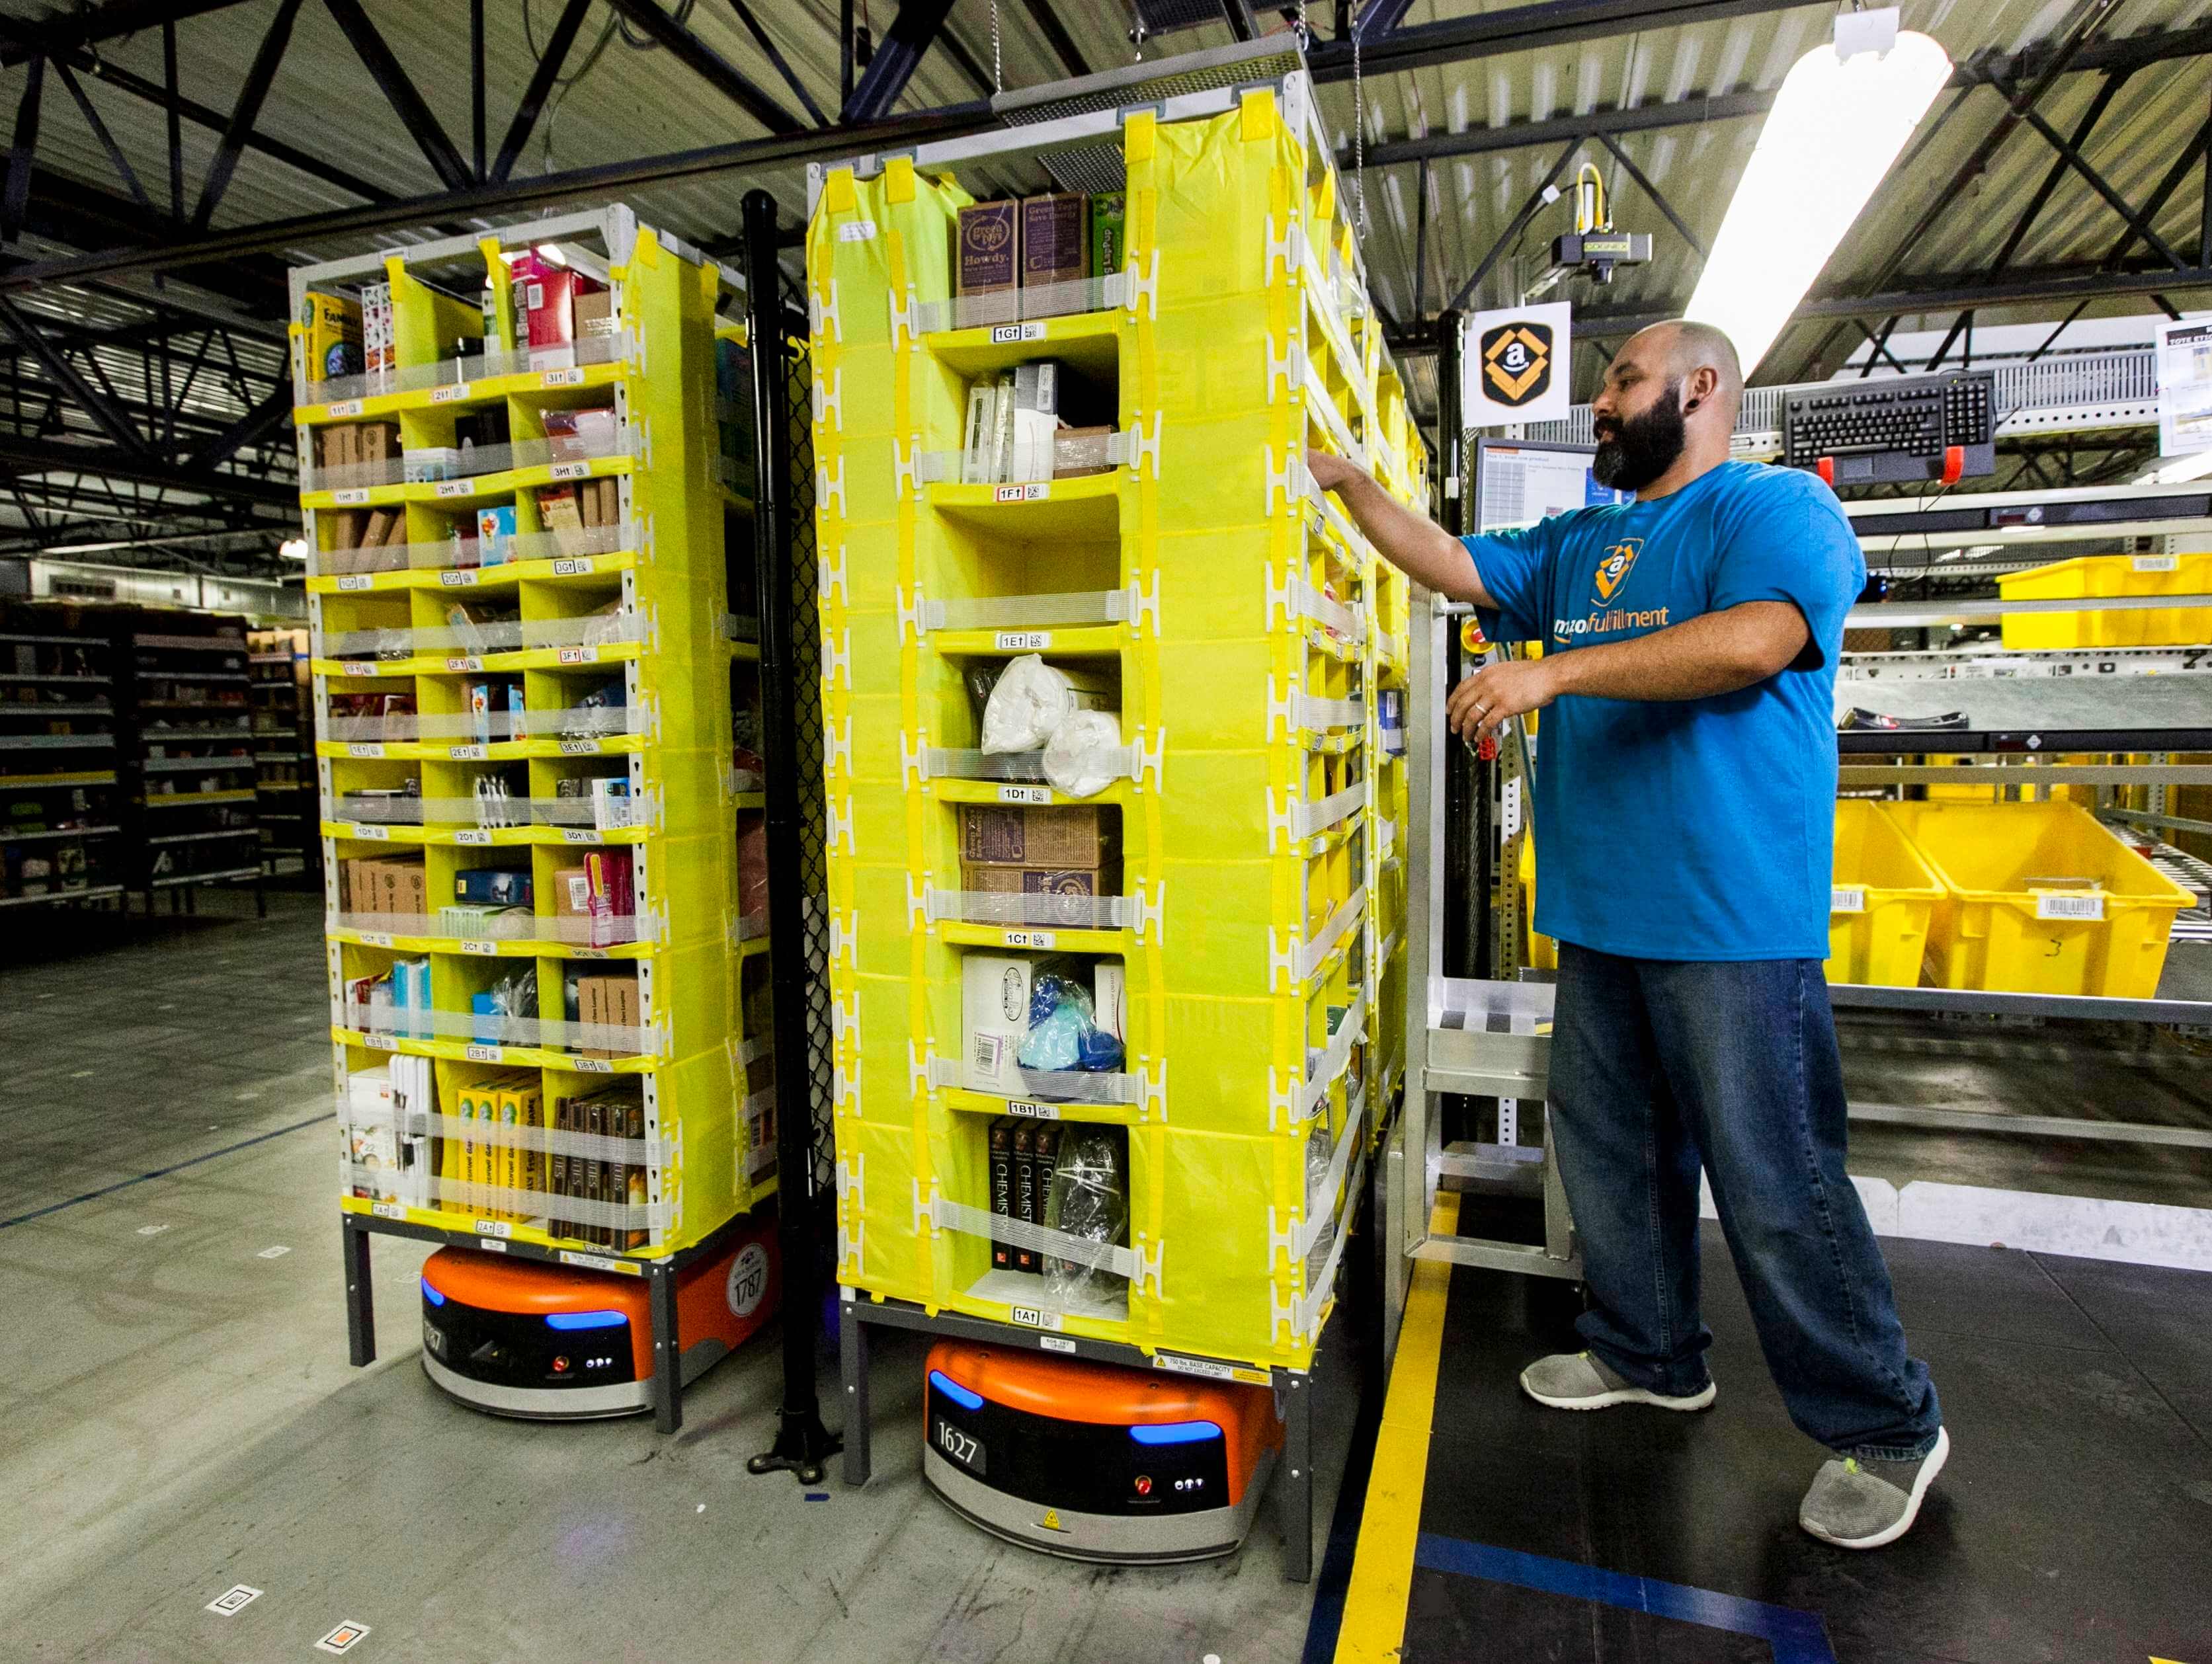 Amazon is using warehouse employees on Twitter to try and fix its public image